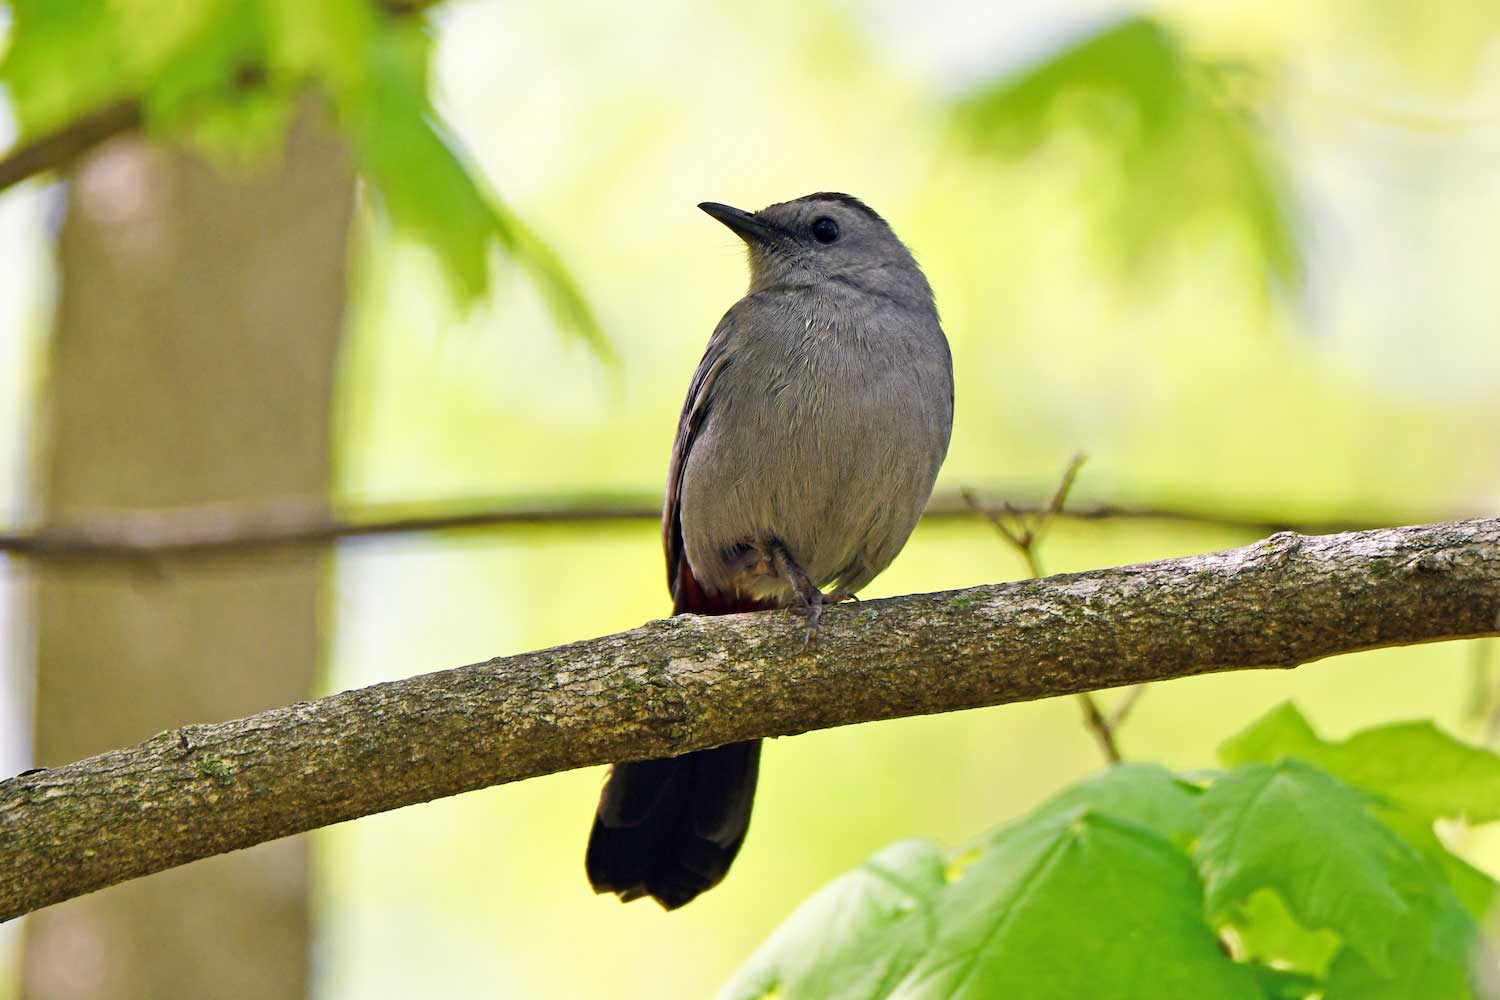 A gray catbird perched on a tree branch.